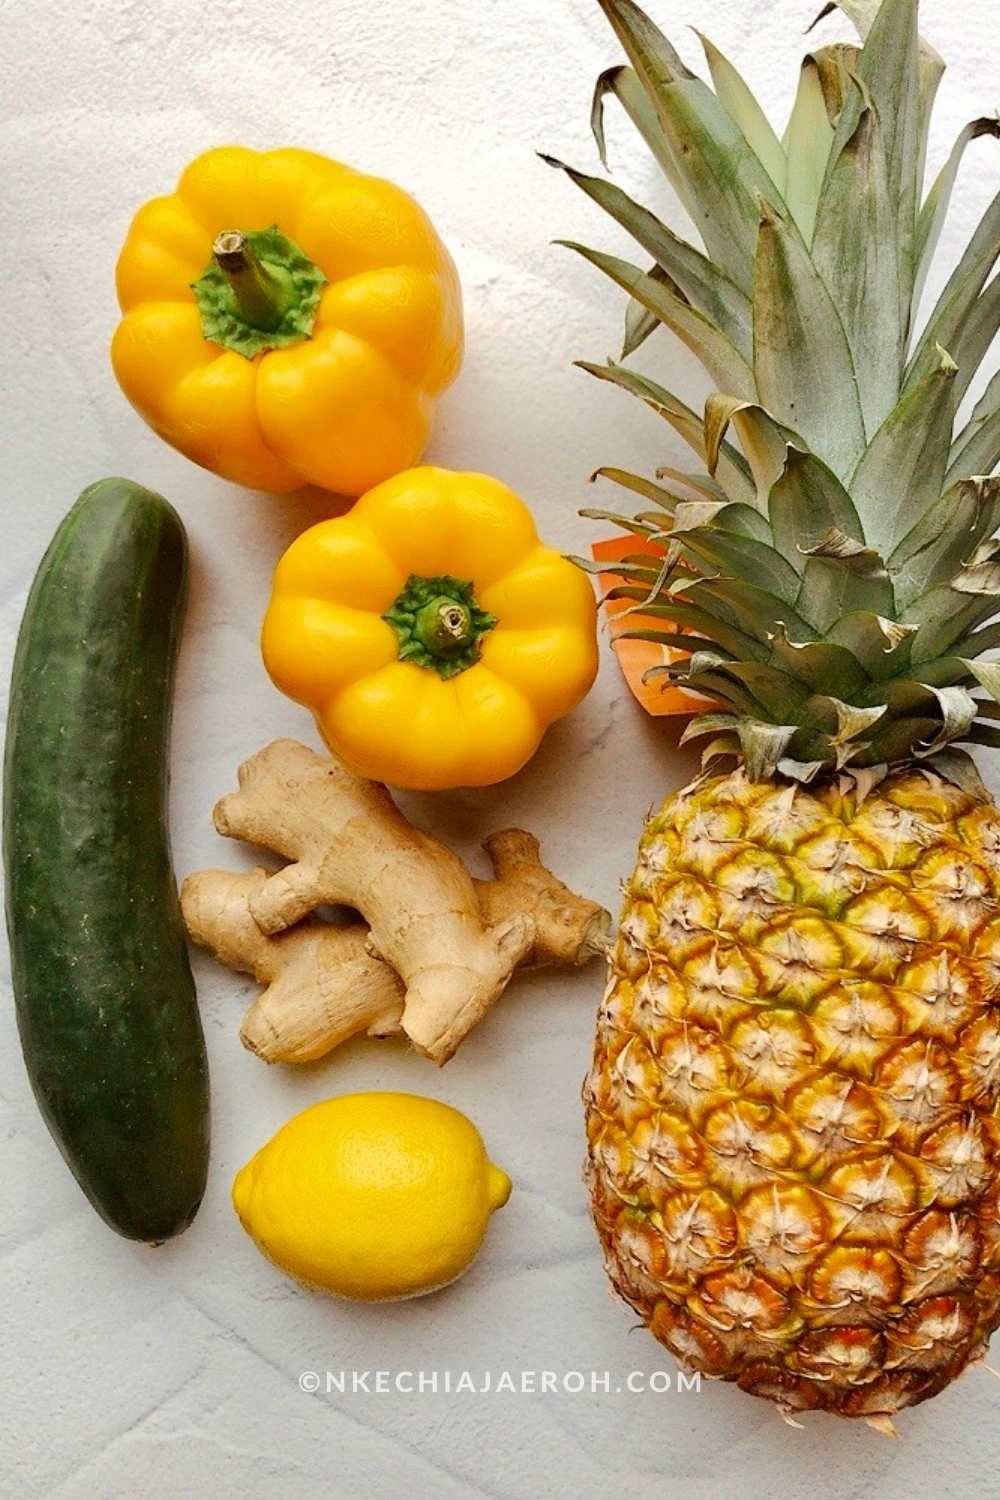 The ingredients for making this pineapple cucumber juice include pineapple (well, hello), cucumber (obviously), bell peppers, ginger, and lemon.